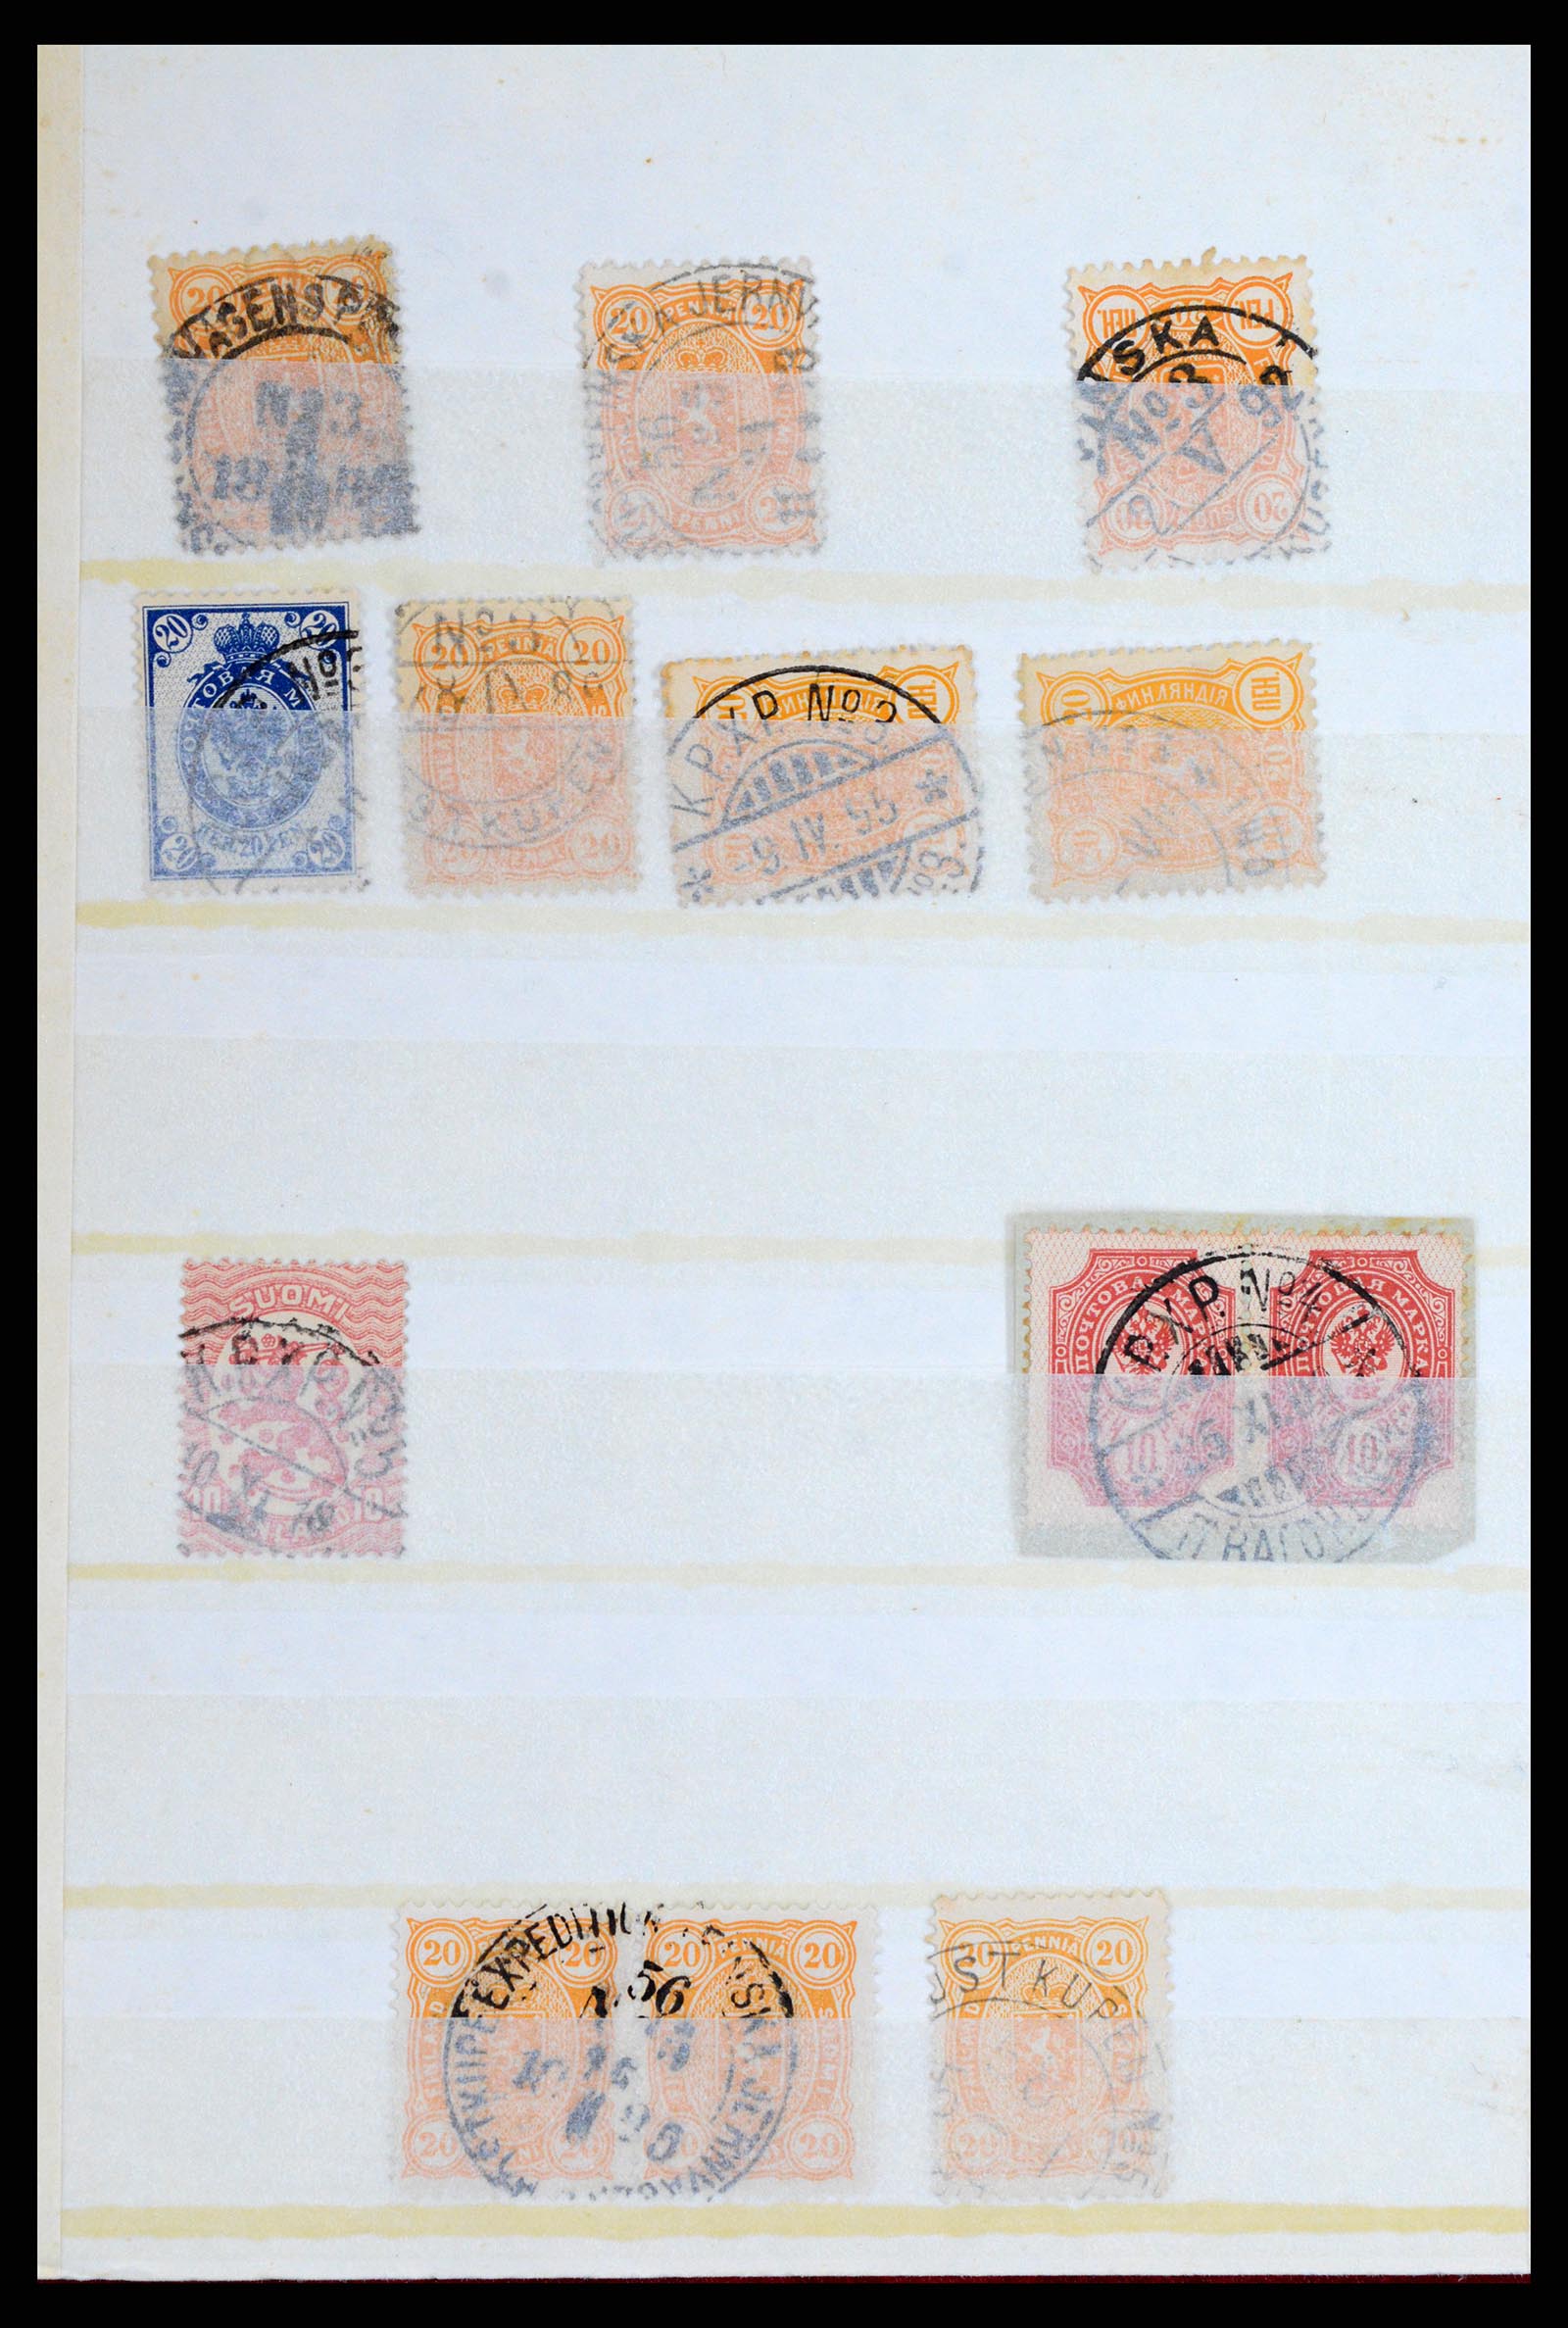 37766 175 - Stamp collection 37766 Finland railway cancellations 1870-1950.